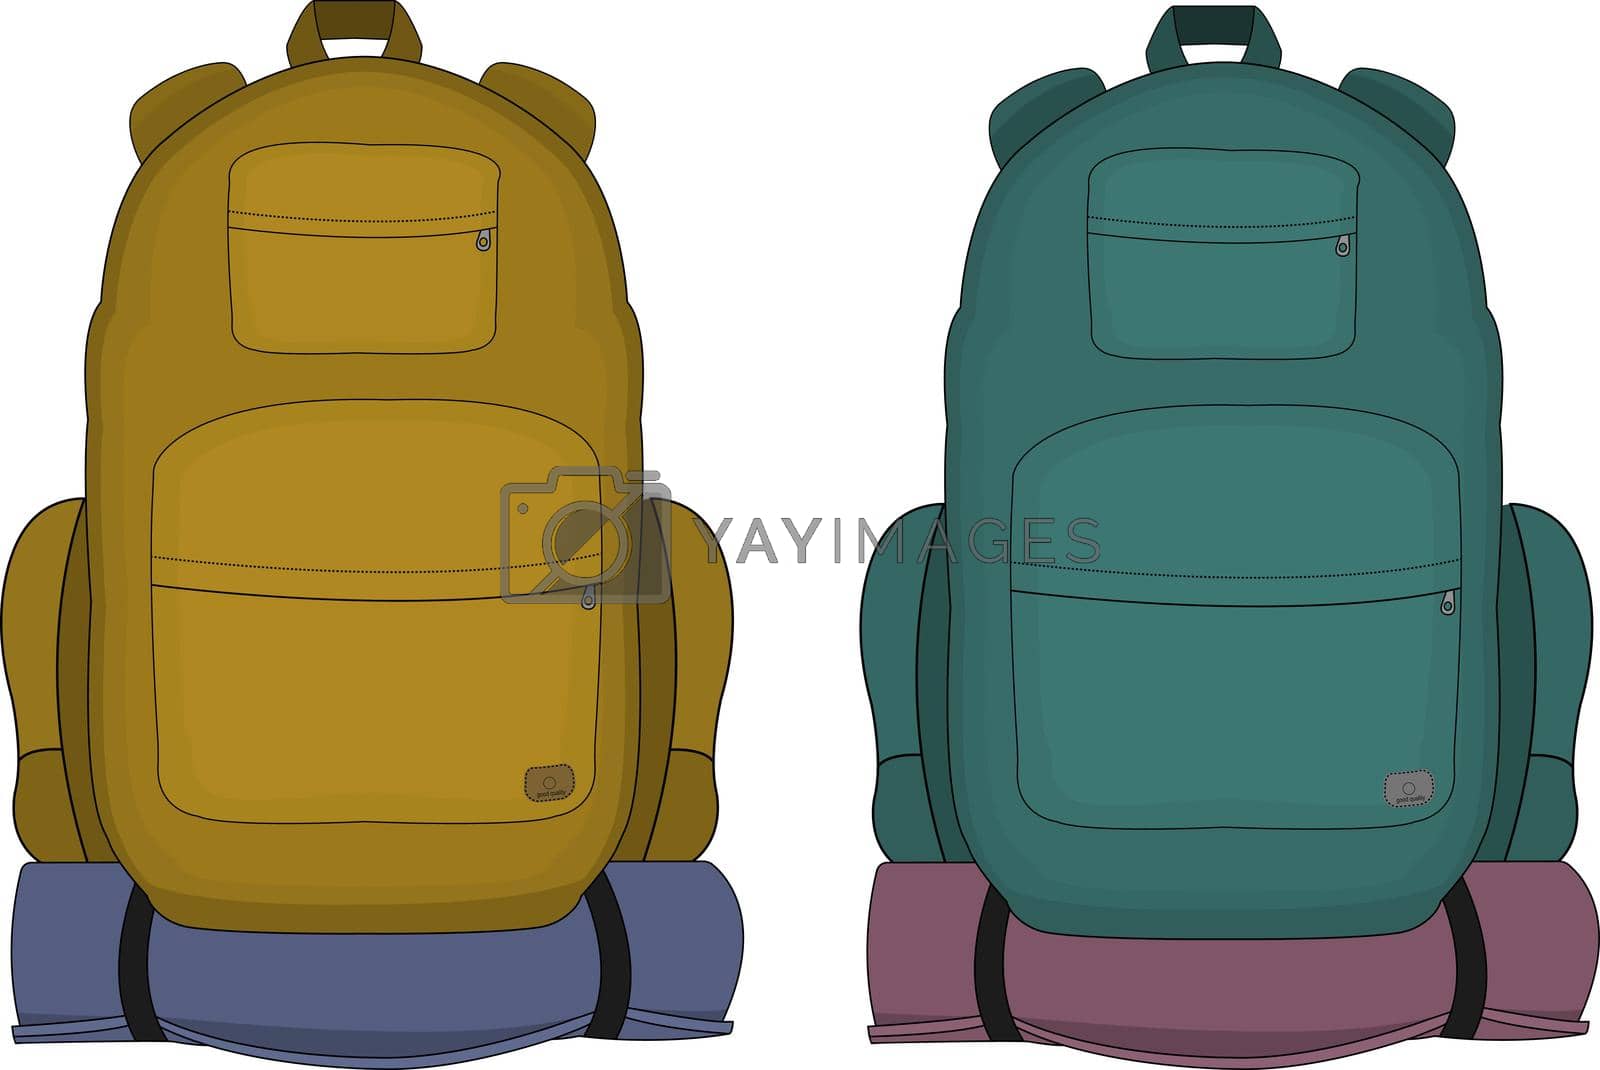 Travel backpacks with mattress. Mustard and aqua blue colors. Vector clip art illustrations isolated on white